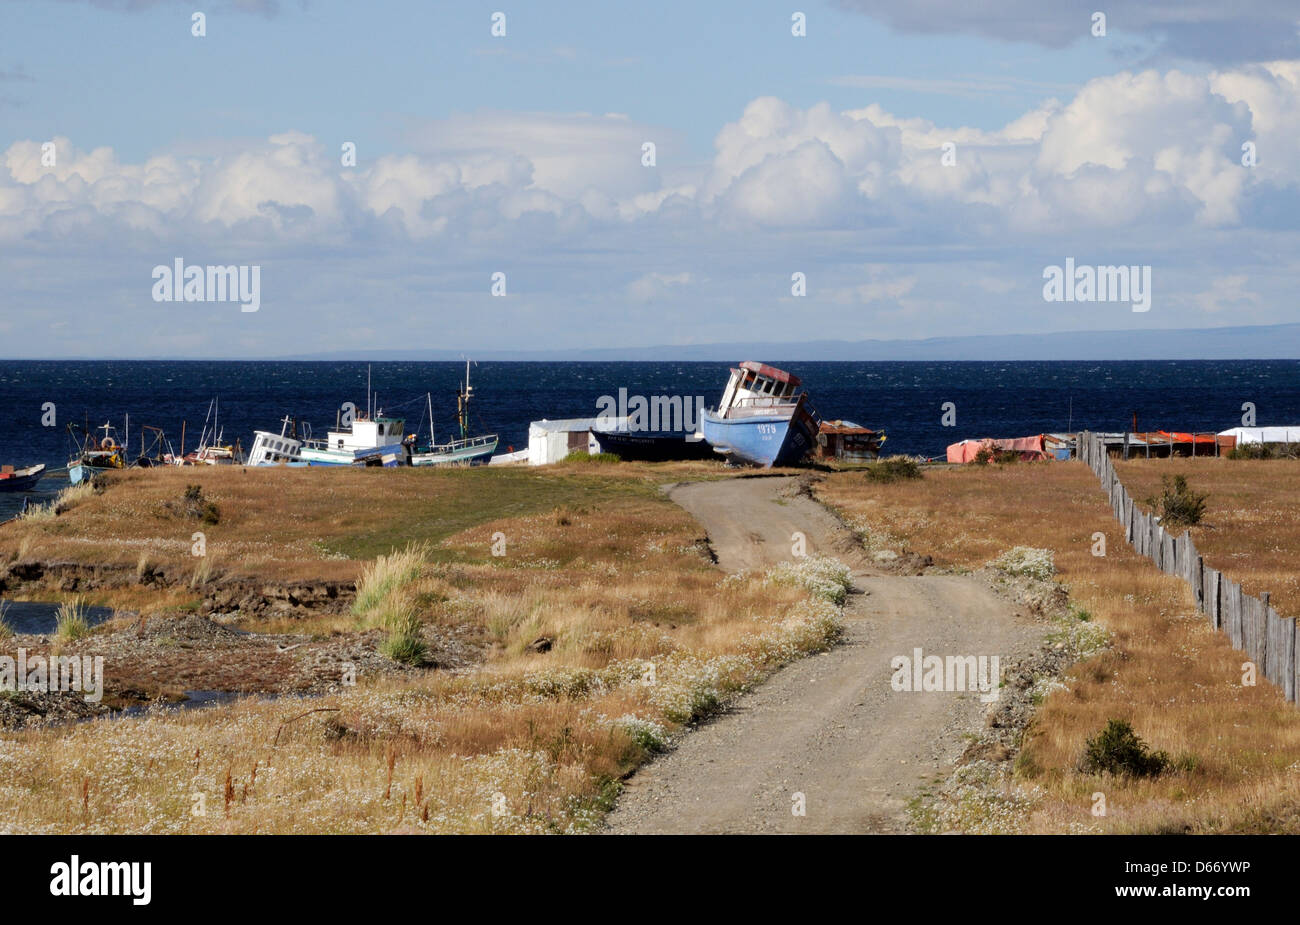 Old wooden fishing boats pulled up above the beach on the Strait of Magellan .  Punta Arenas, Chile. Stock Photo